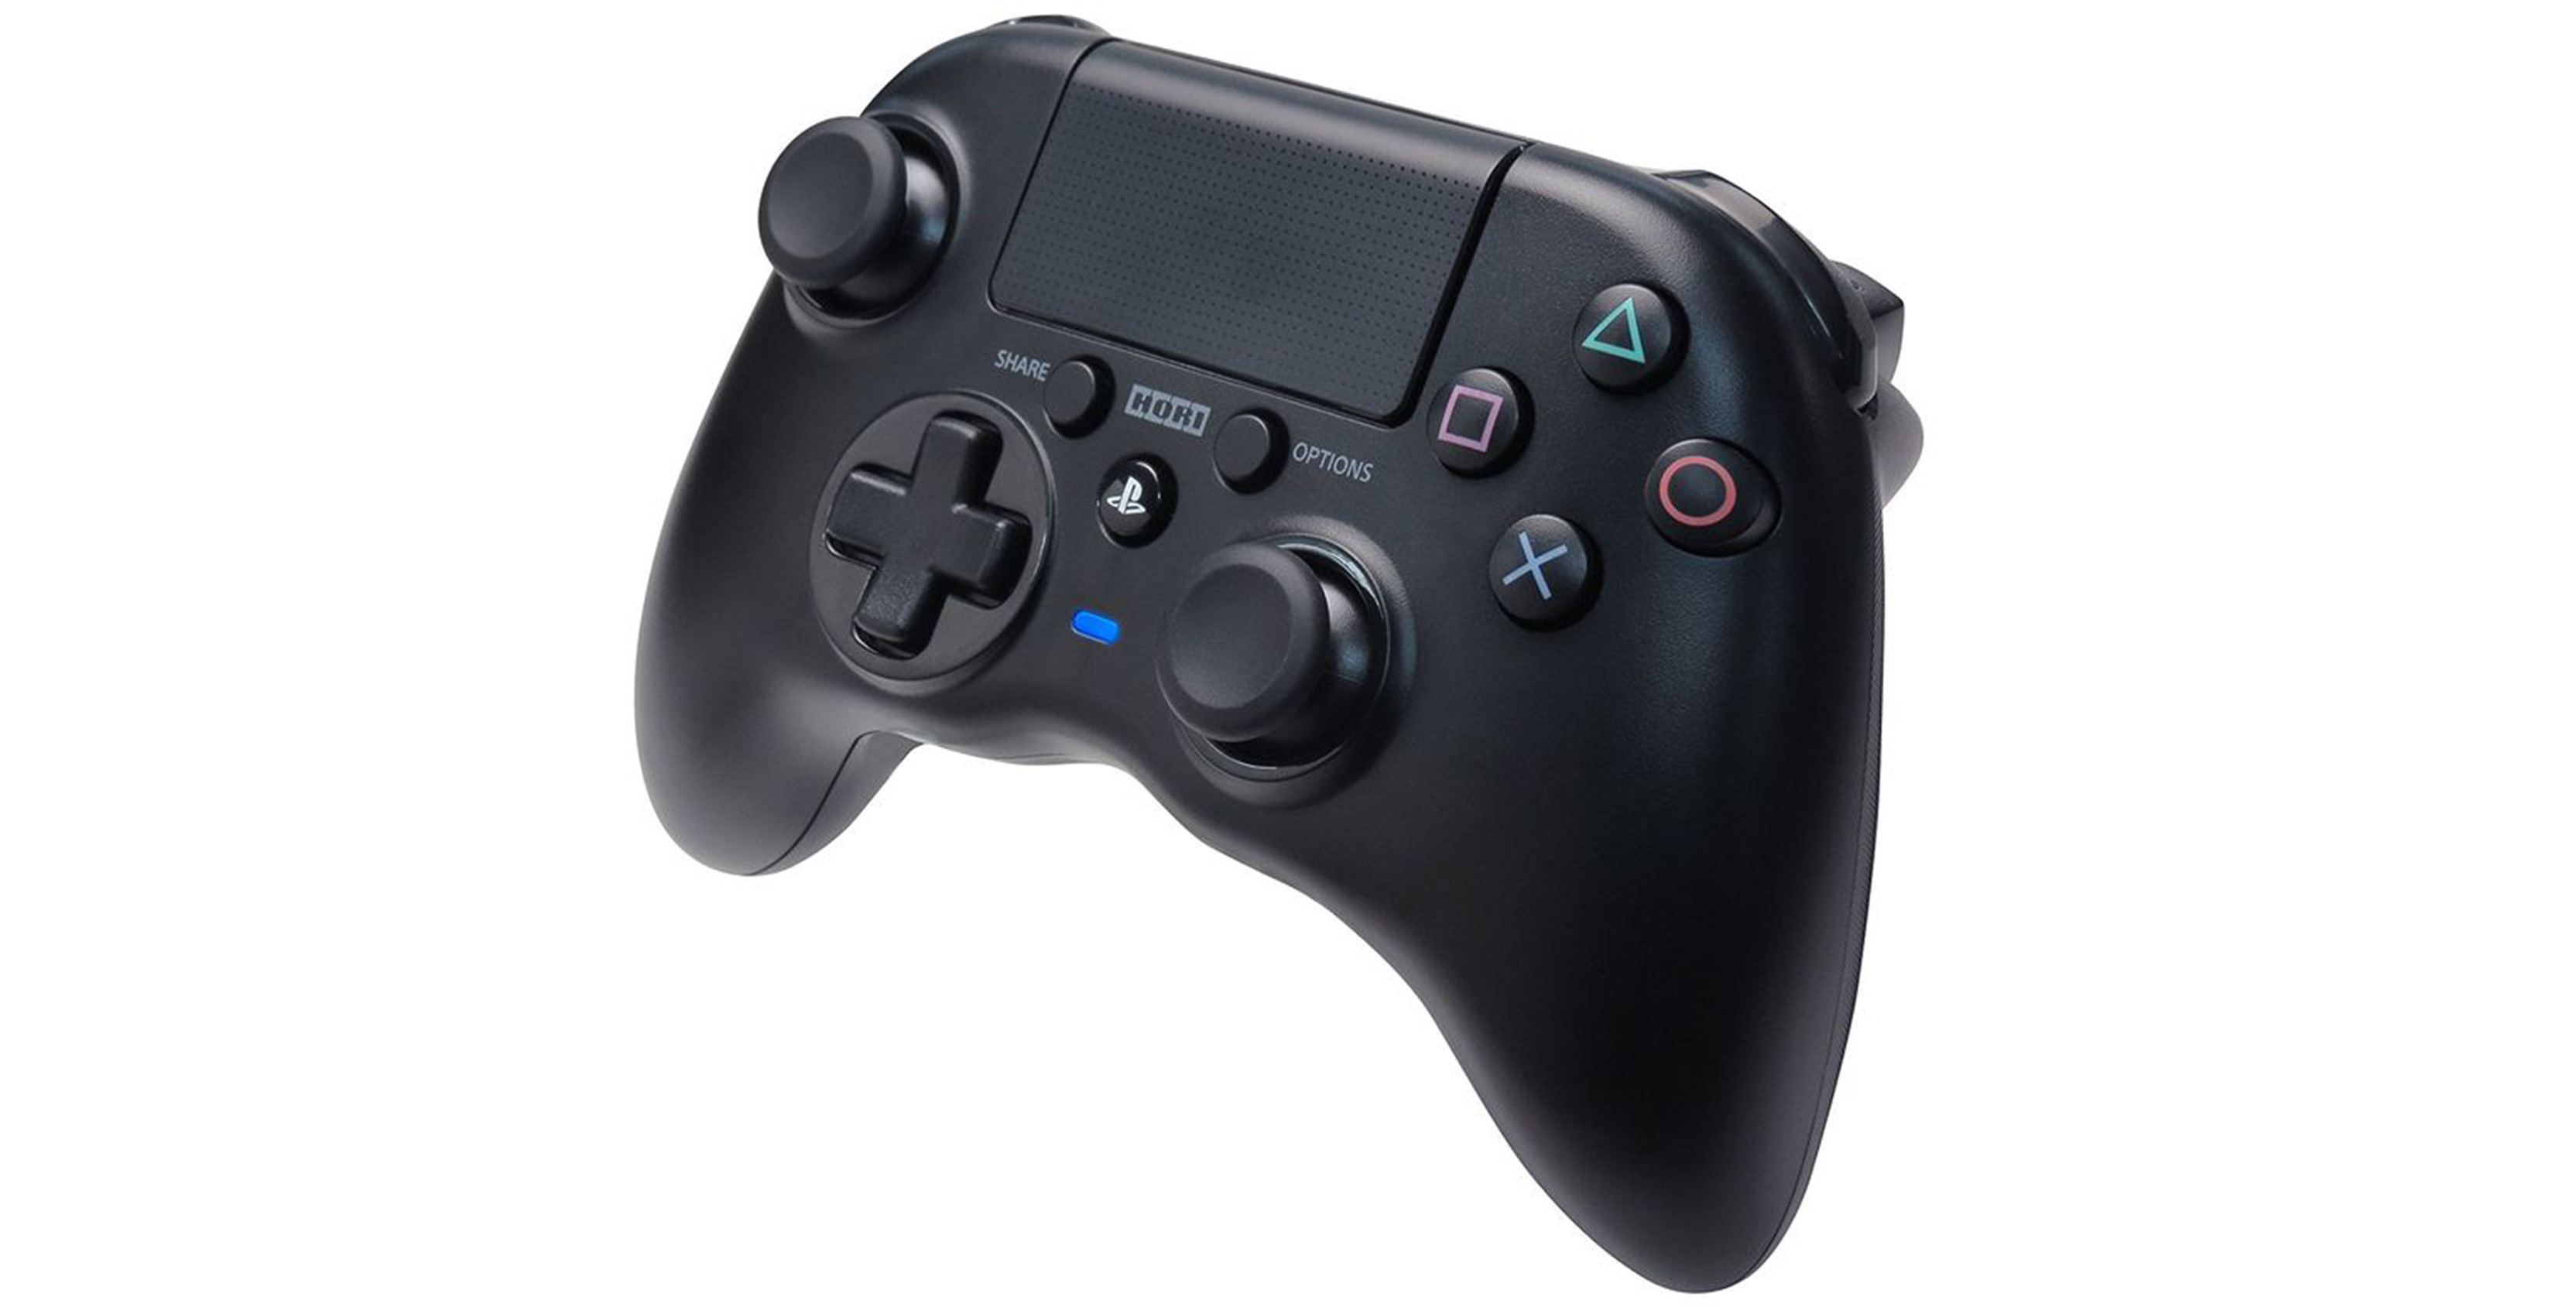 Onyx Wireless PS4 controller